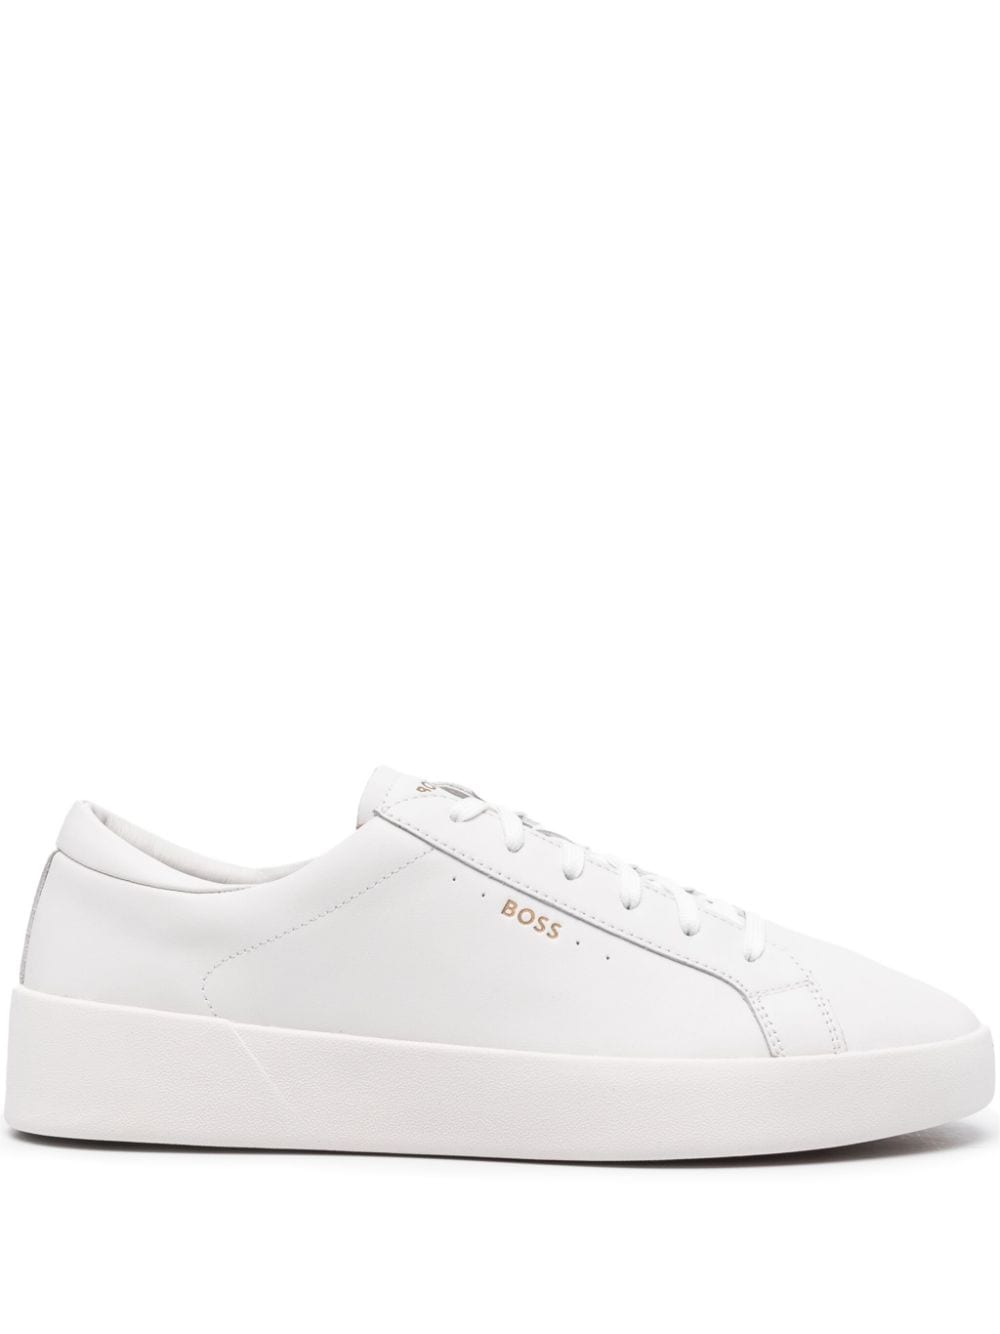 Hugo Boss Lace-up Leather Sneakers In Weiss